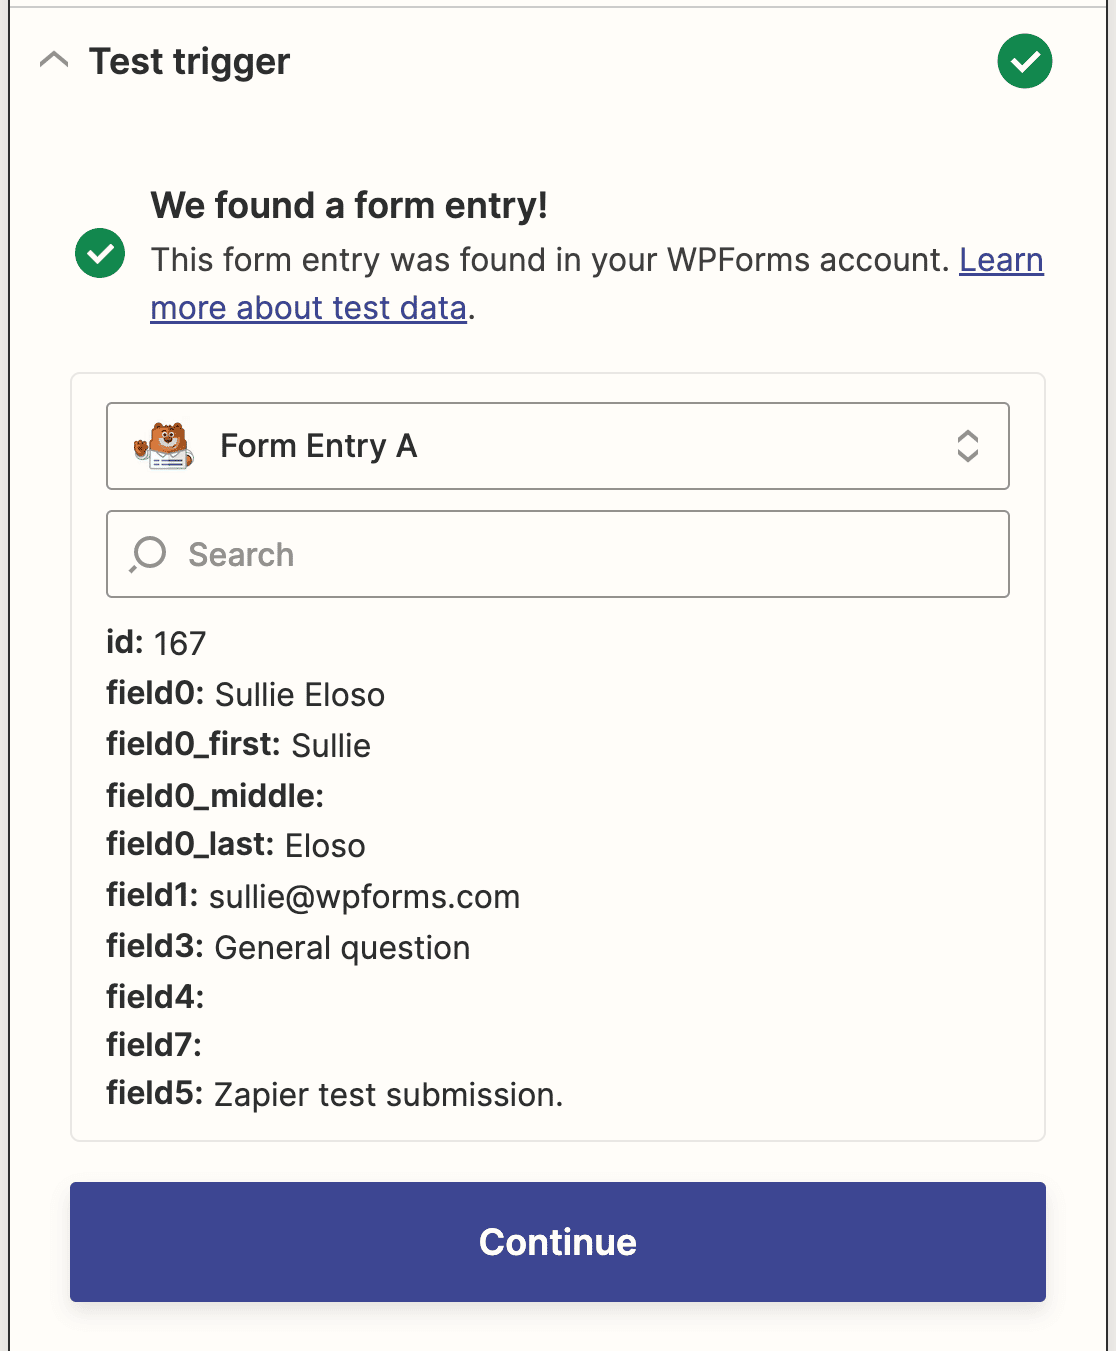 A Zapier trigger test for a support ticket form